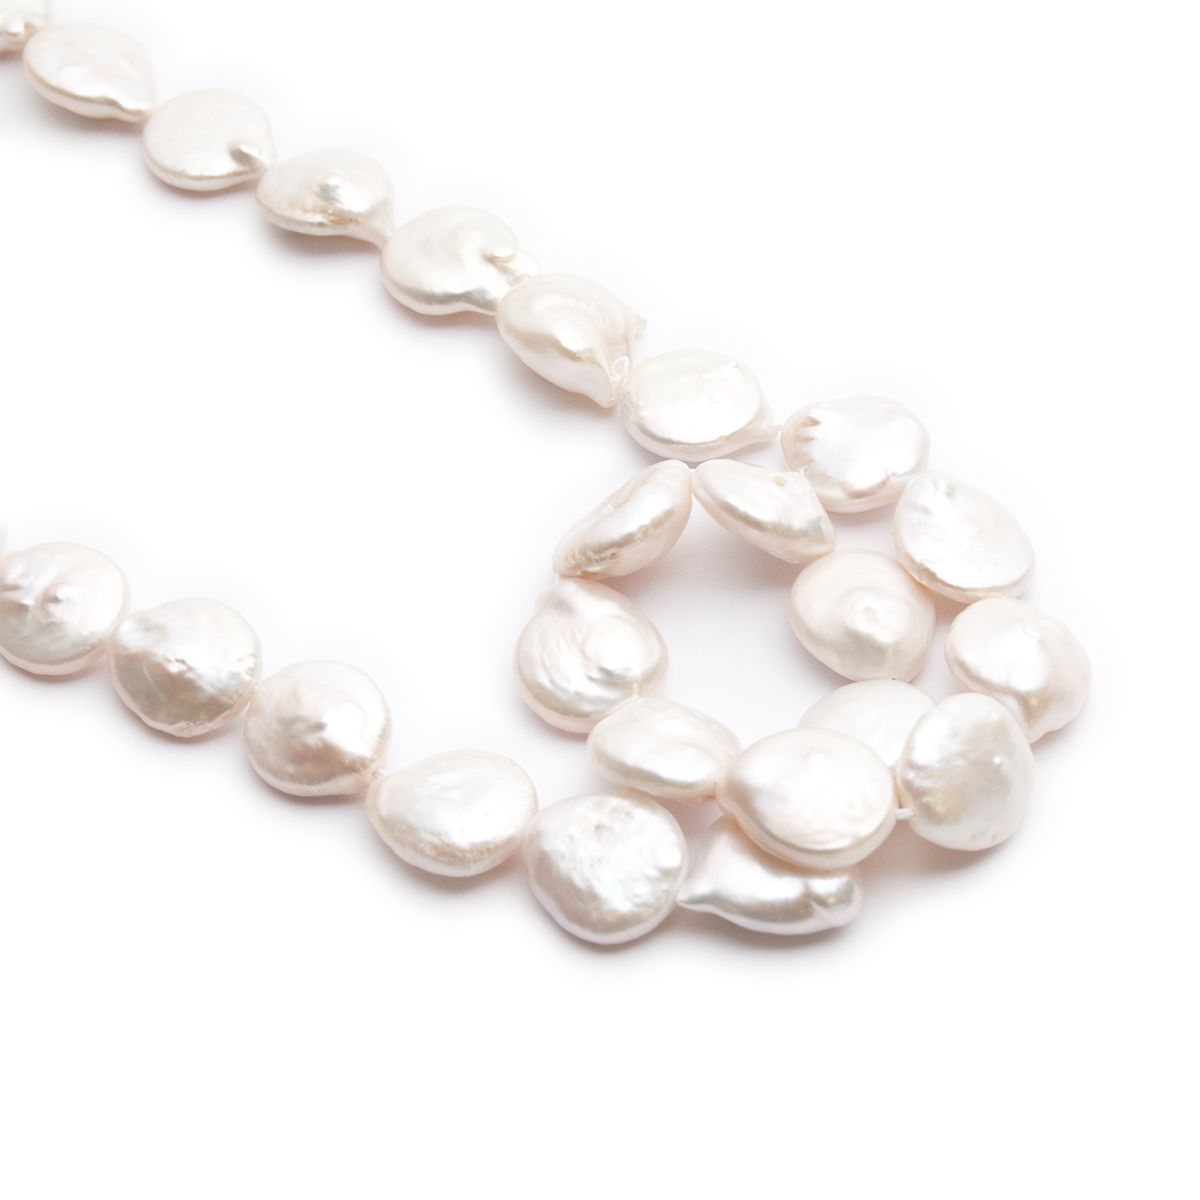 Cultured Freshwater White Coin Pearls - Approx 12mm